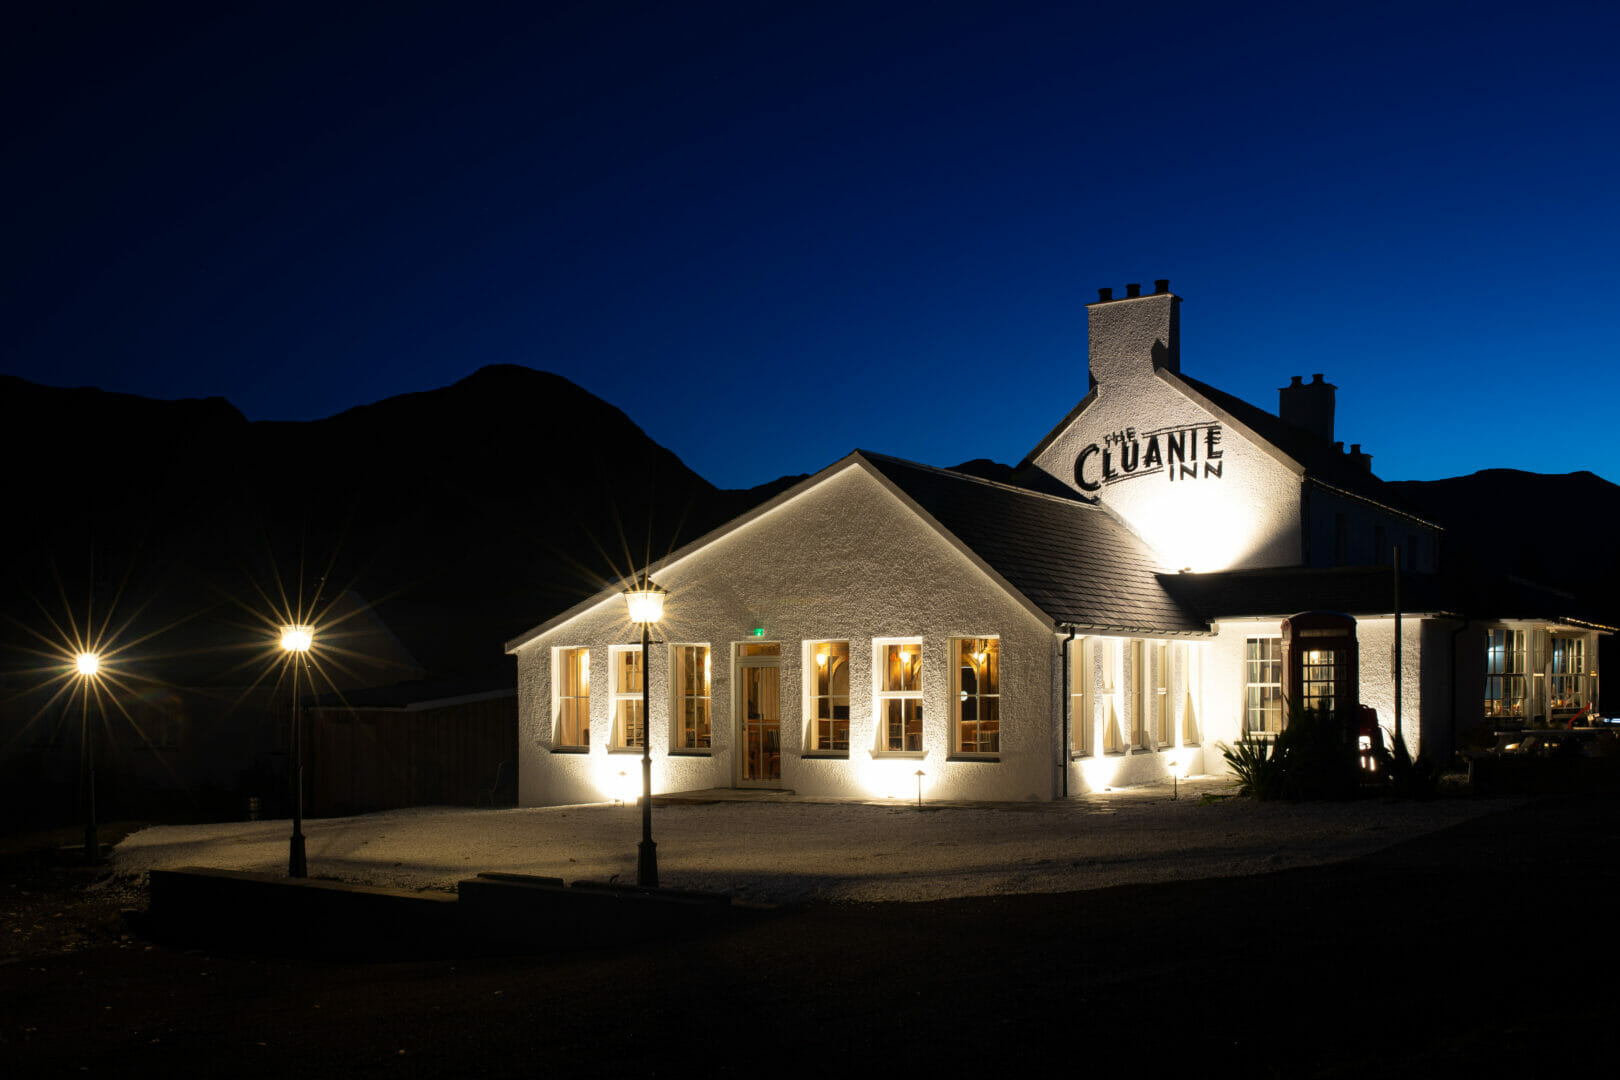 Country hotel in the Highlands opens its doors following significant investment